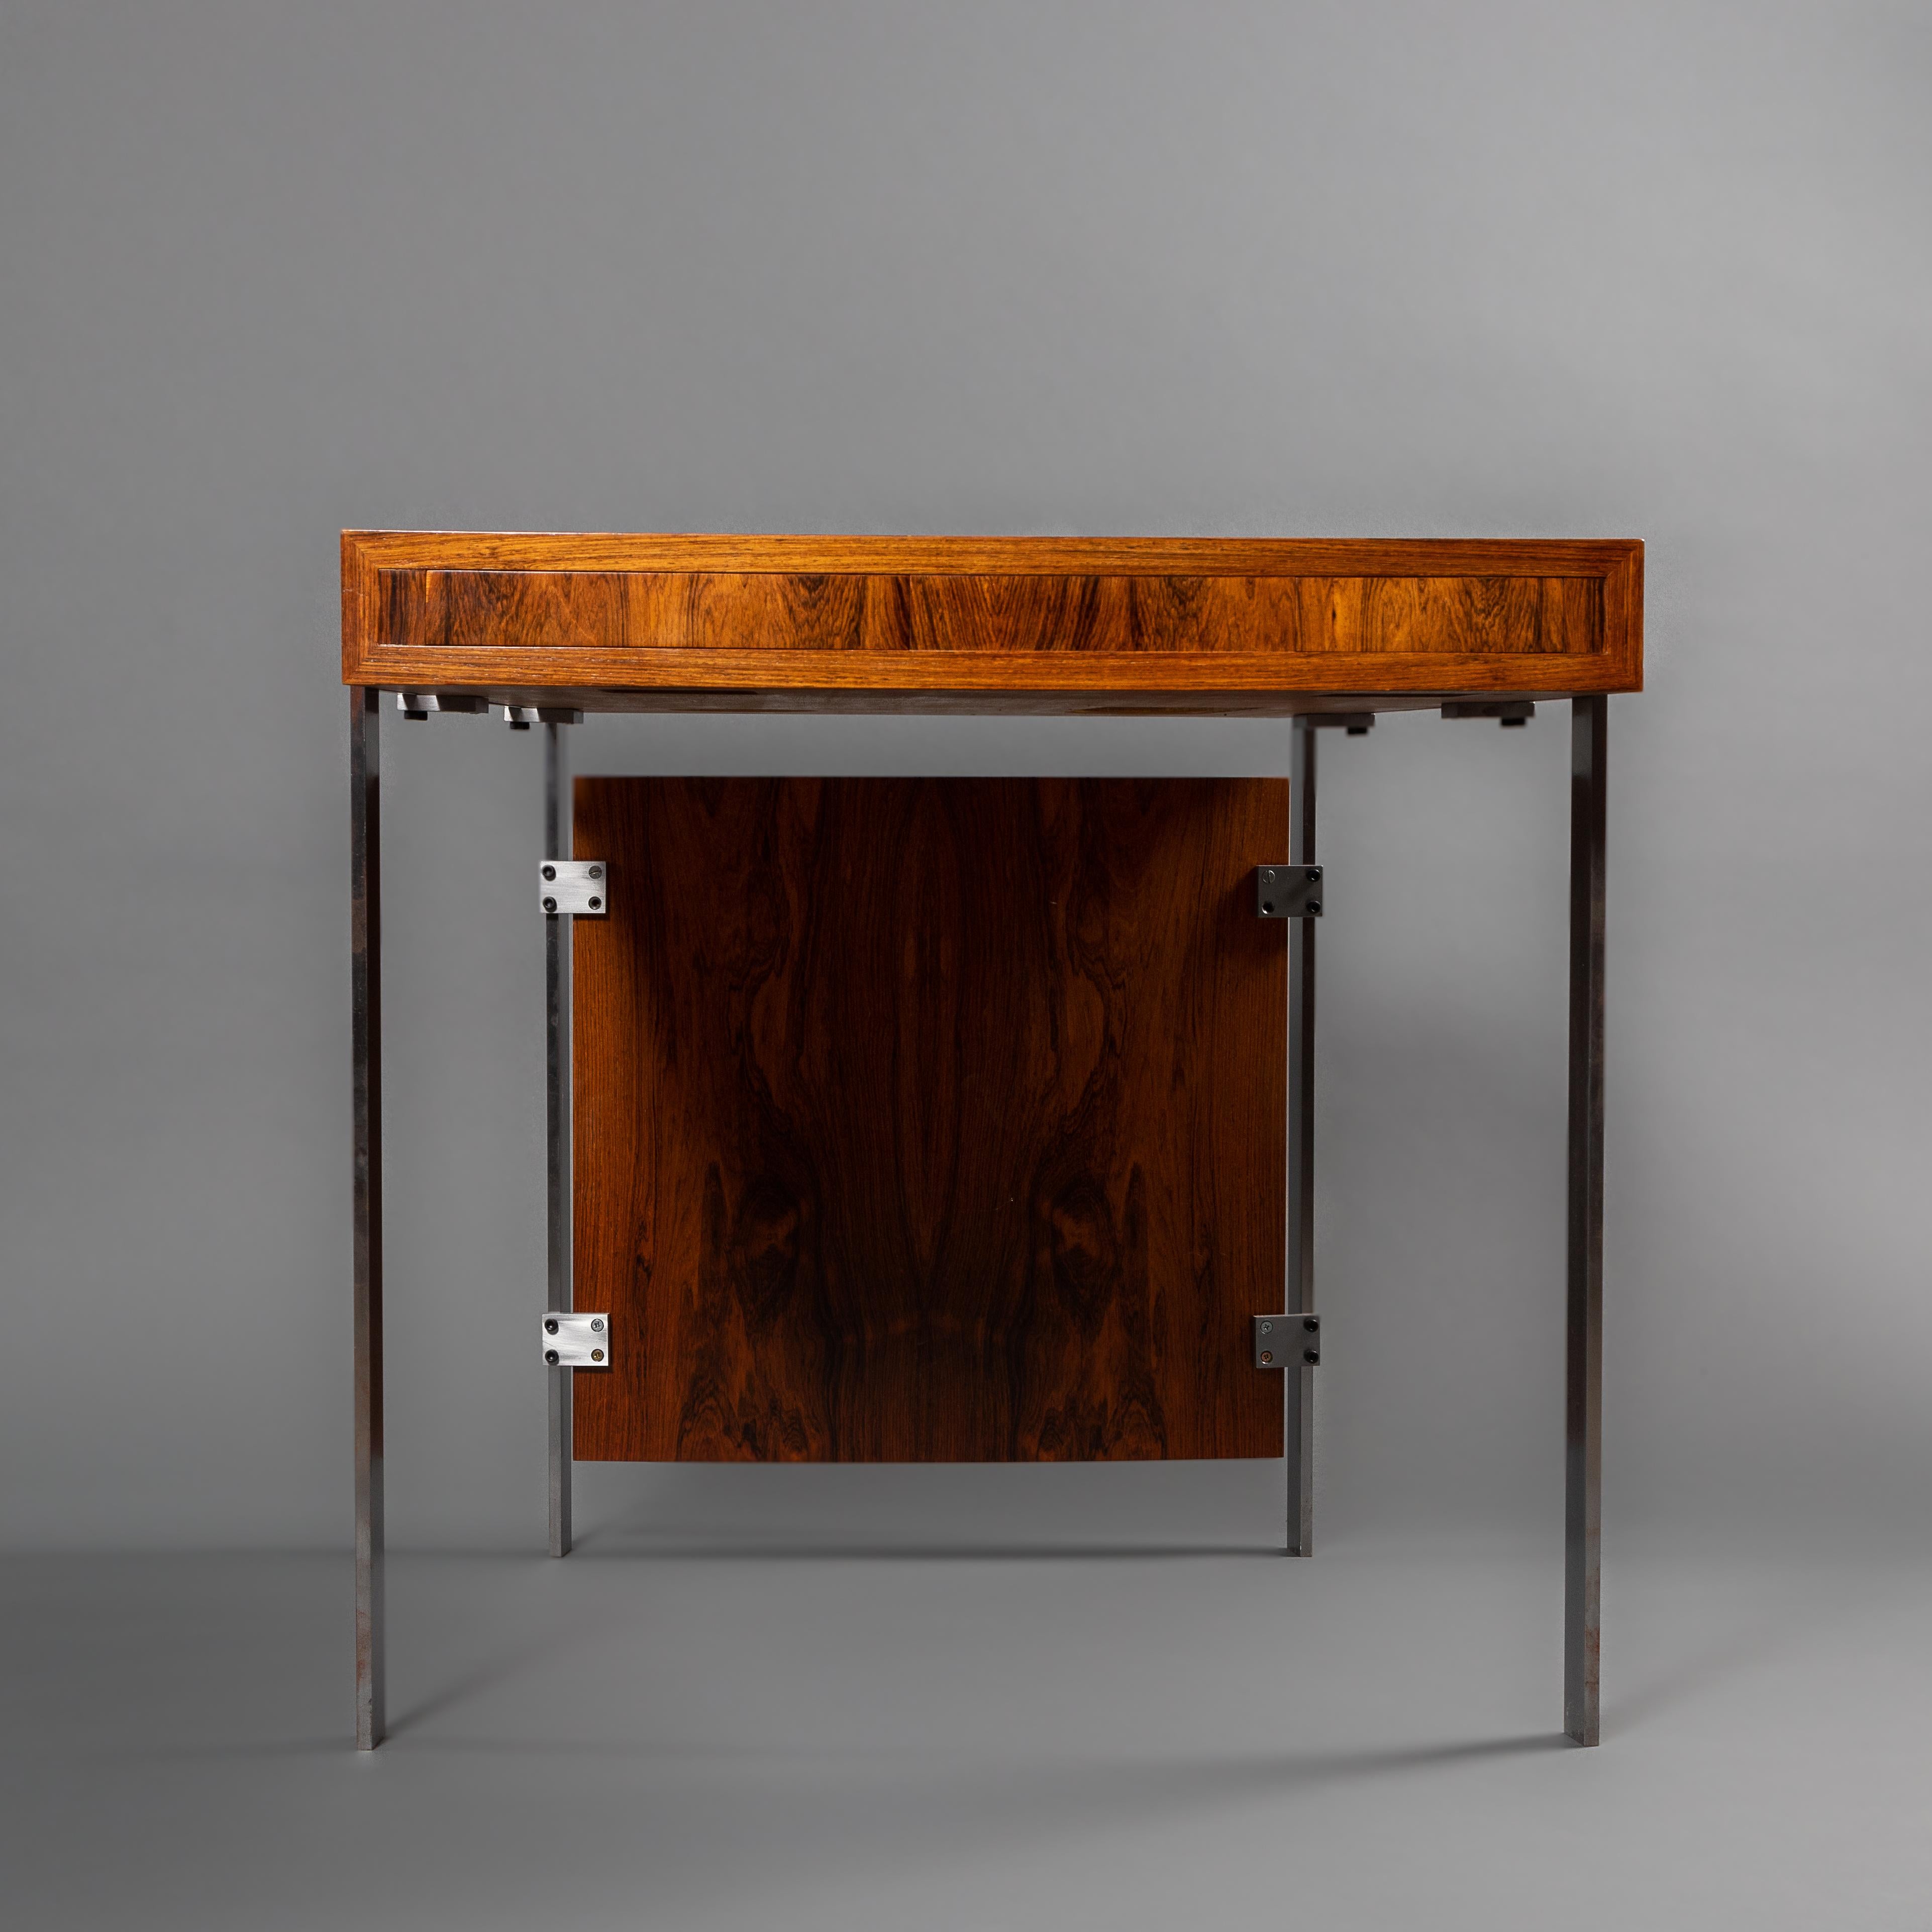 Free-standing rosewood desk, front with two drawers, one drawer with integrated ash tray, satin polished steel frame. Designed 1962. Manufactured by Borella-Hansen & Co and Herluf Poulsen, frame manufactured by Herluf Poulsen. 

The tables are